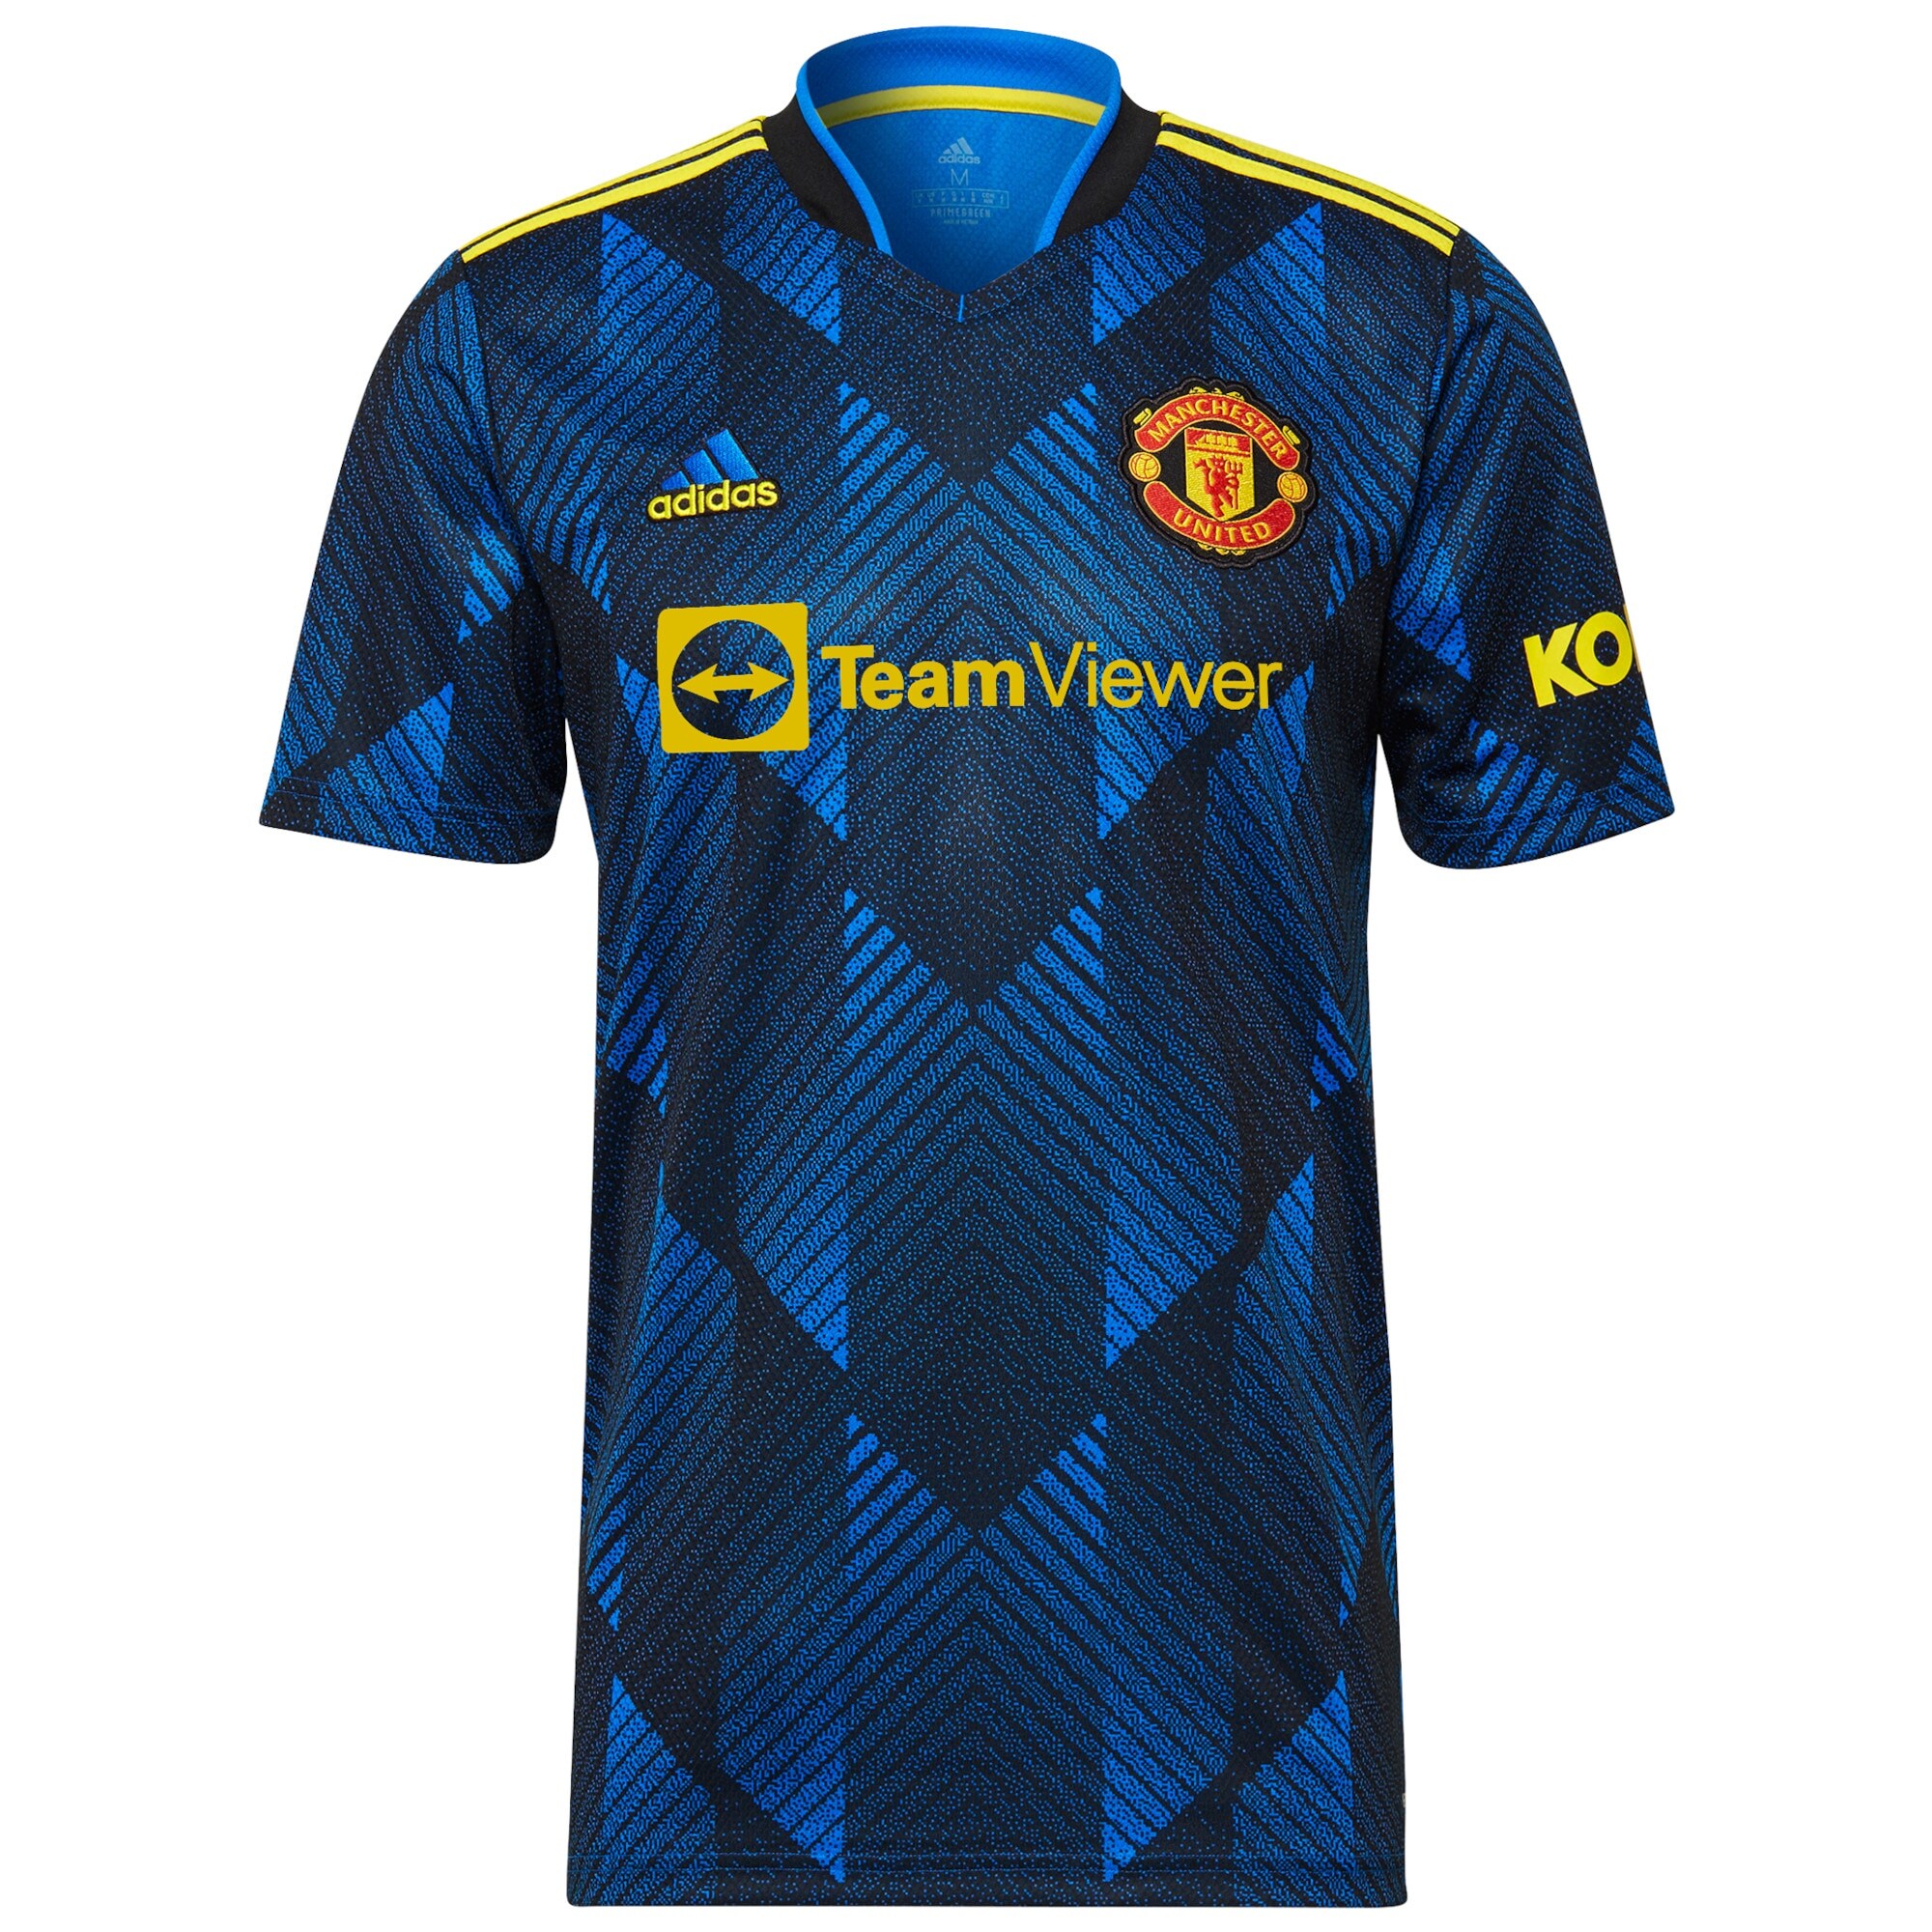 Manchester United Cup Third Shirt 2021-22 with Cavani 21 printing